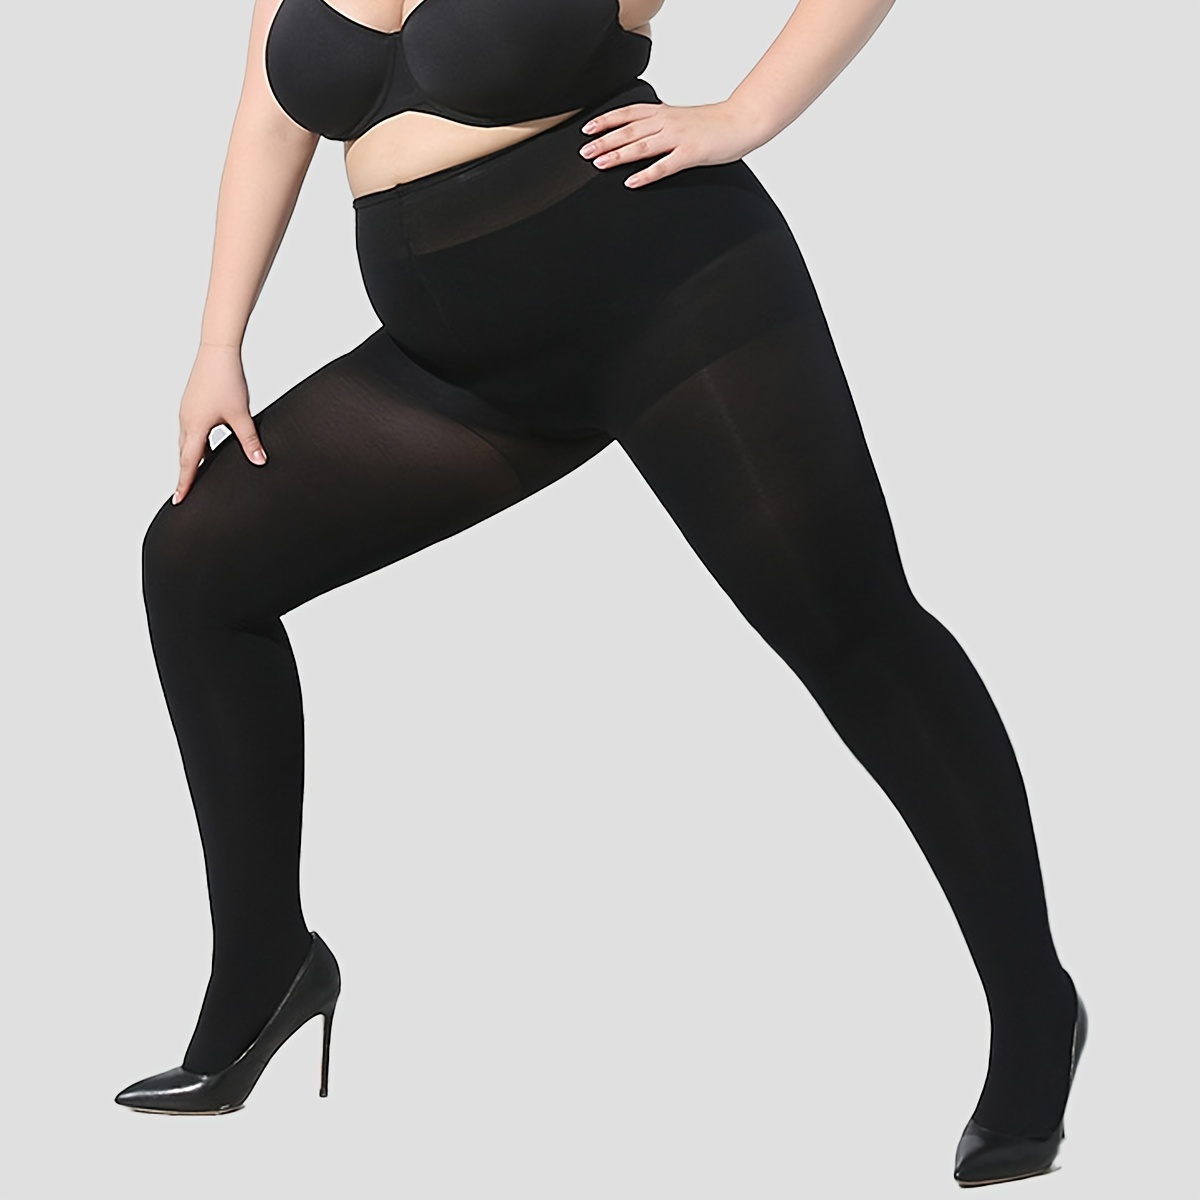 30D Plus Size Tights for Women, Super Elastic Body Shaper Pantyhose  Stockings